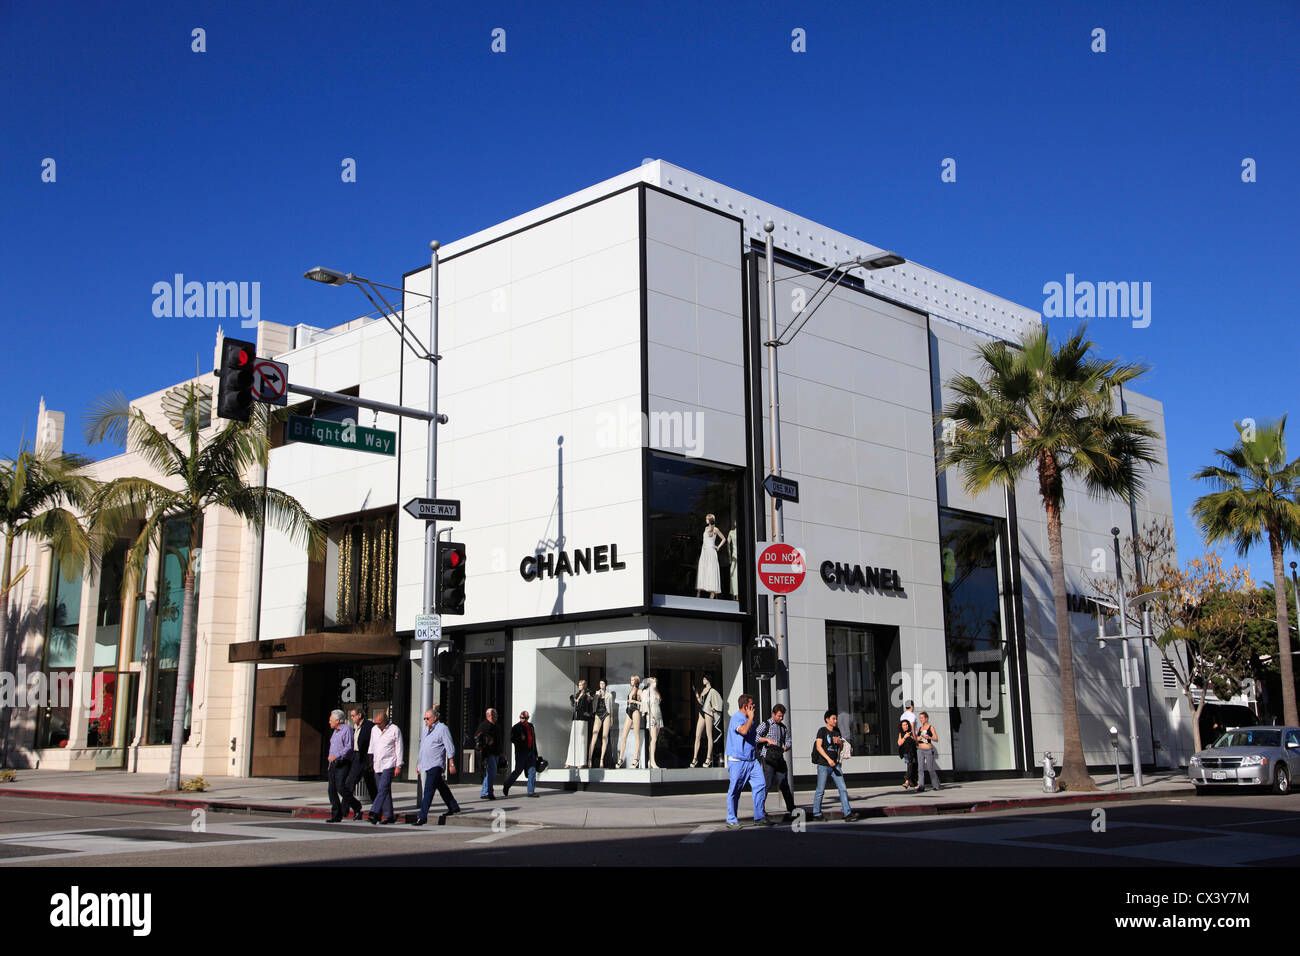 Chanel Store At Rodeo Drive In Beverly Hills - CALIFORNIA, USA - MARCH 18,  2019 Stock Photo, Picture and Royalty Free Image. Image 137284004.